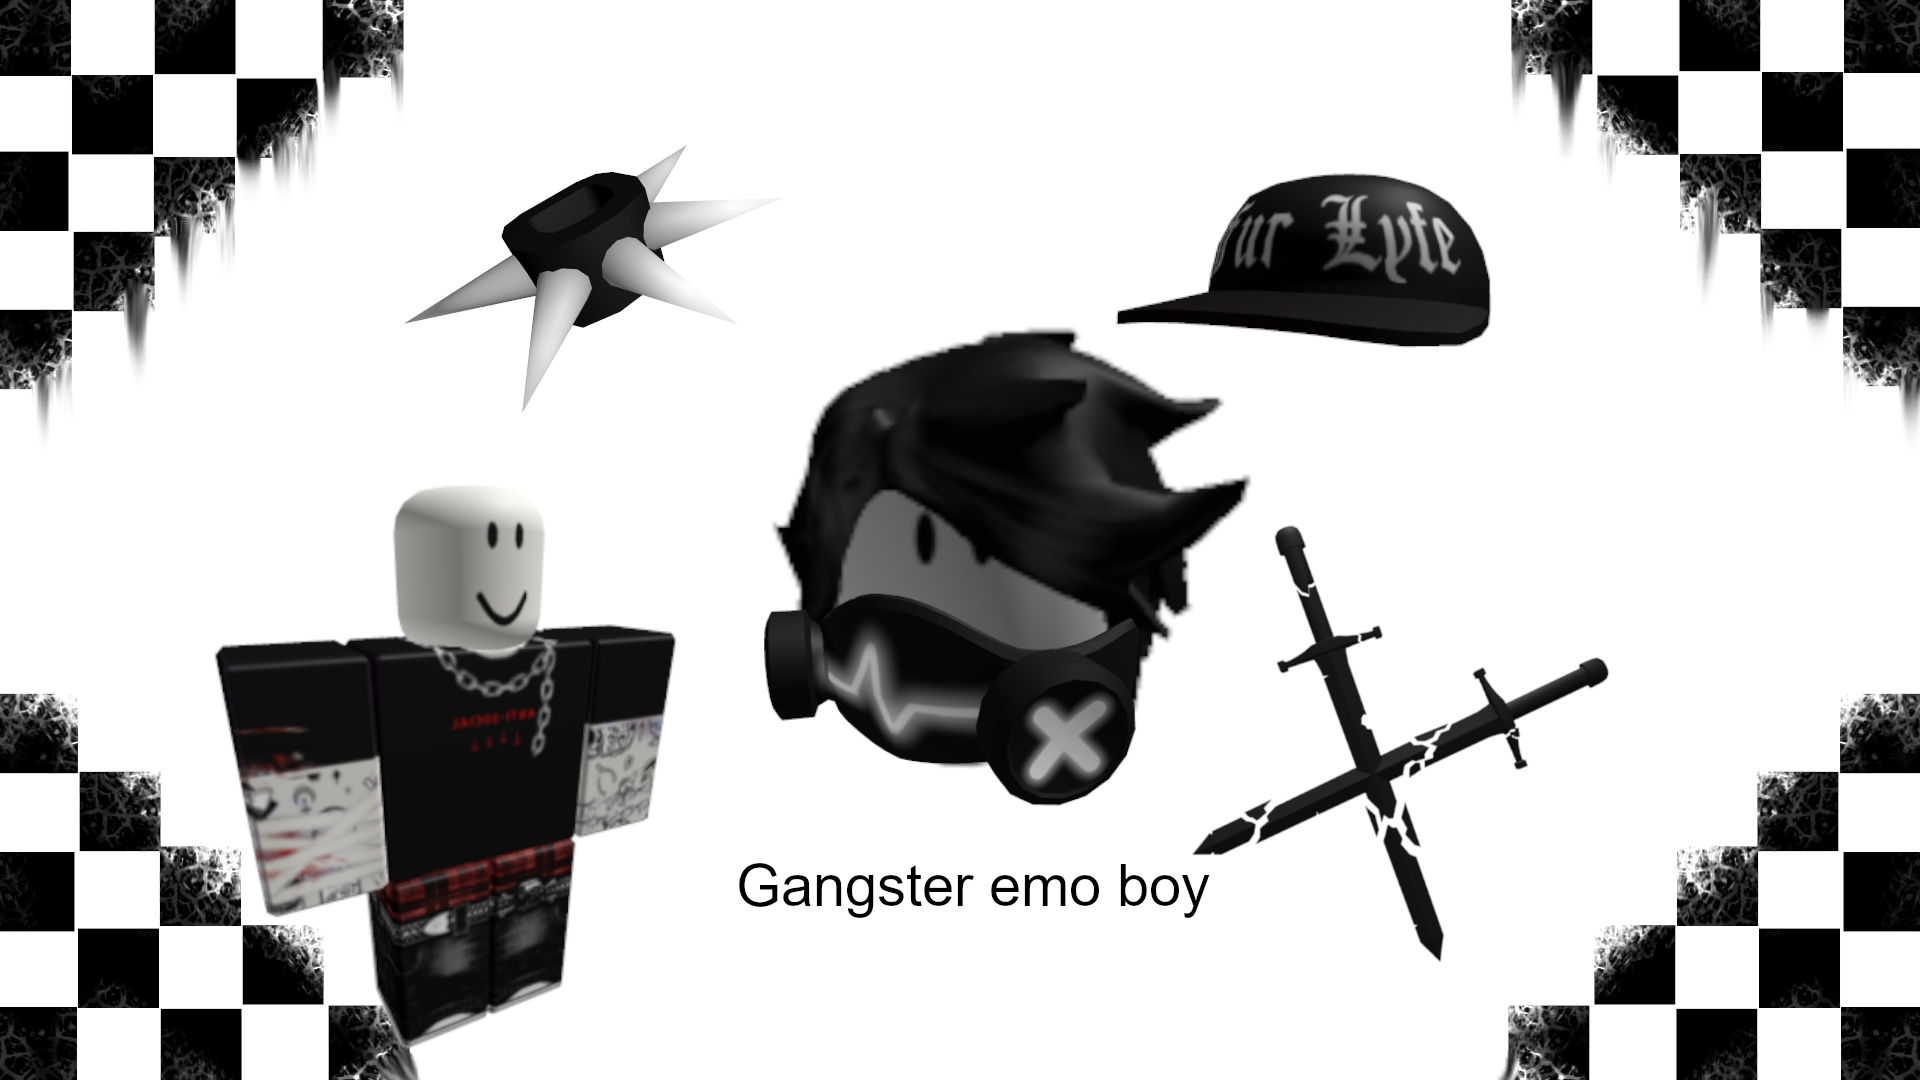 Roblox Boy Outfit Wallpapers - Wallpaper Cave